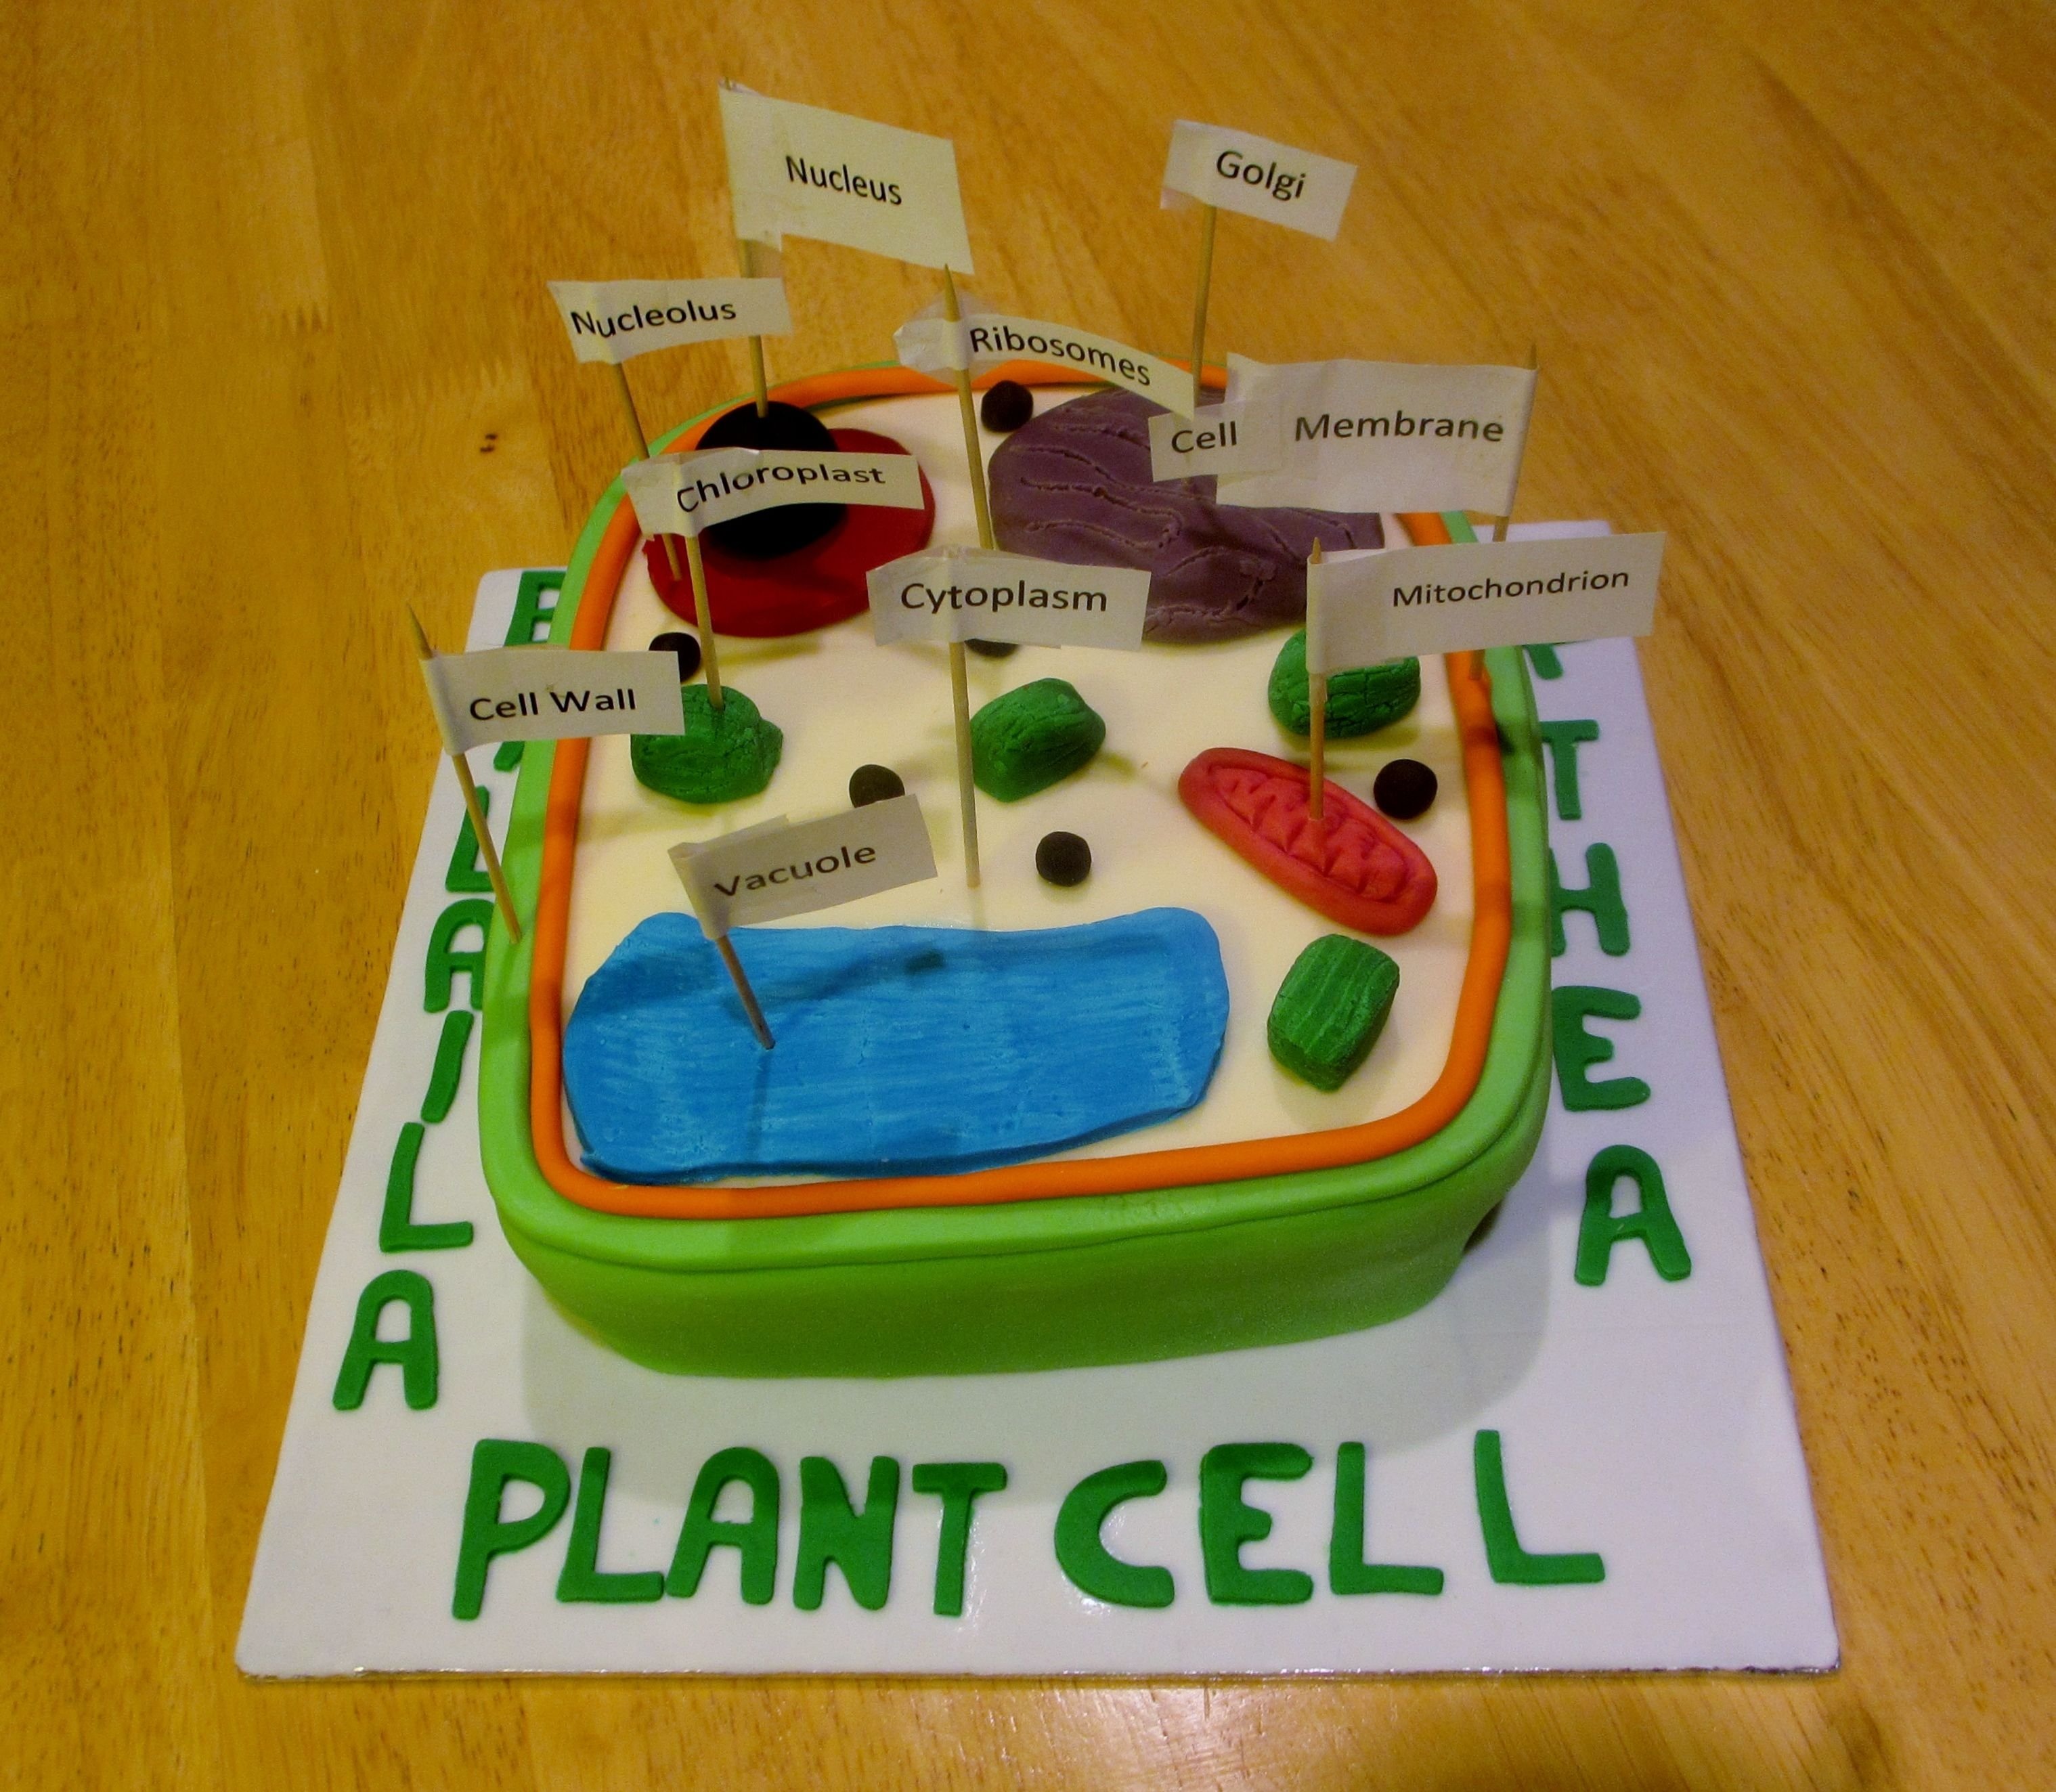 10 Ideal Edible Plant Cell Project Ideas plant cell biology homework diy crafts that i love pinterest 4 2022